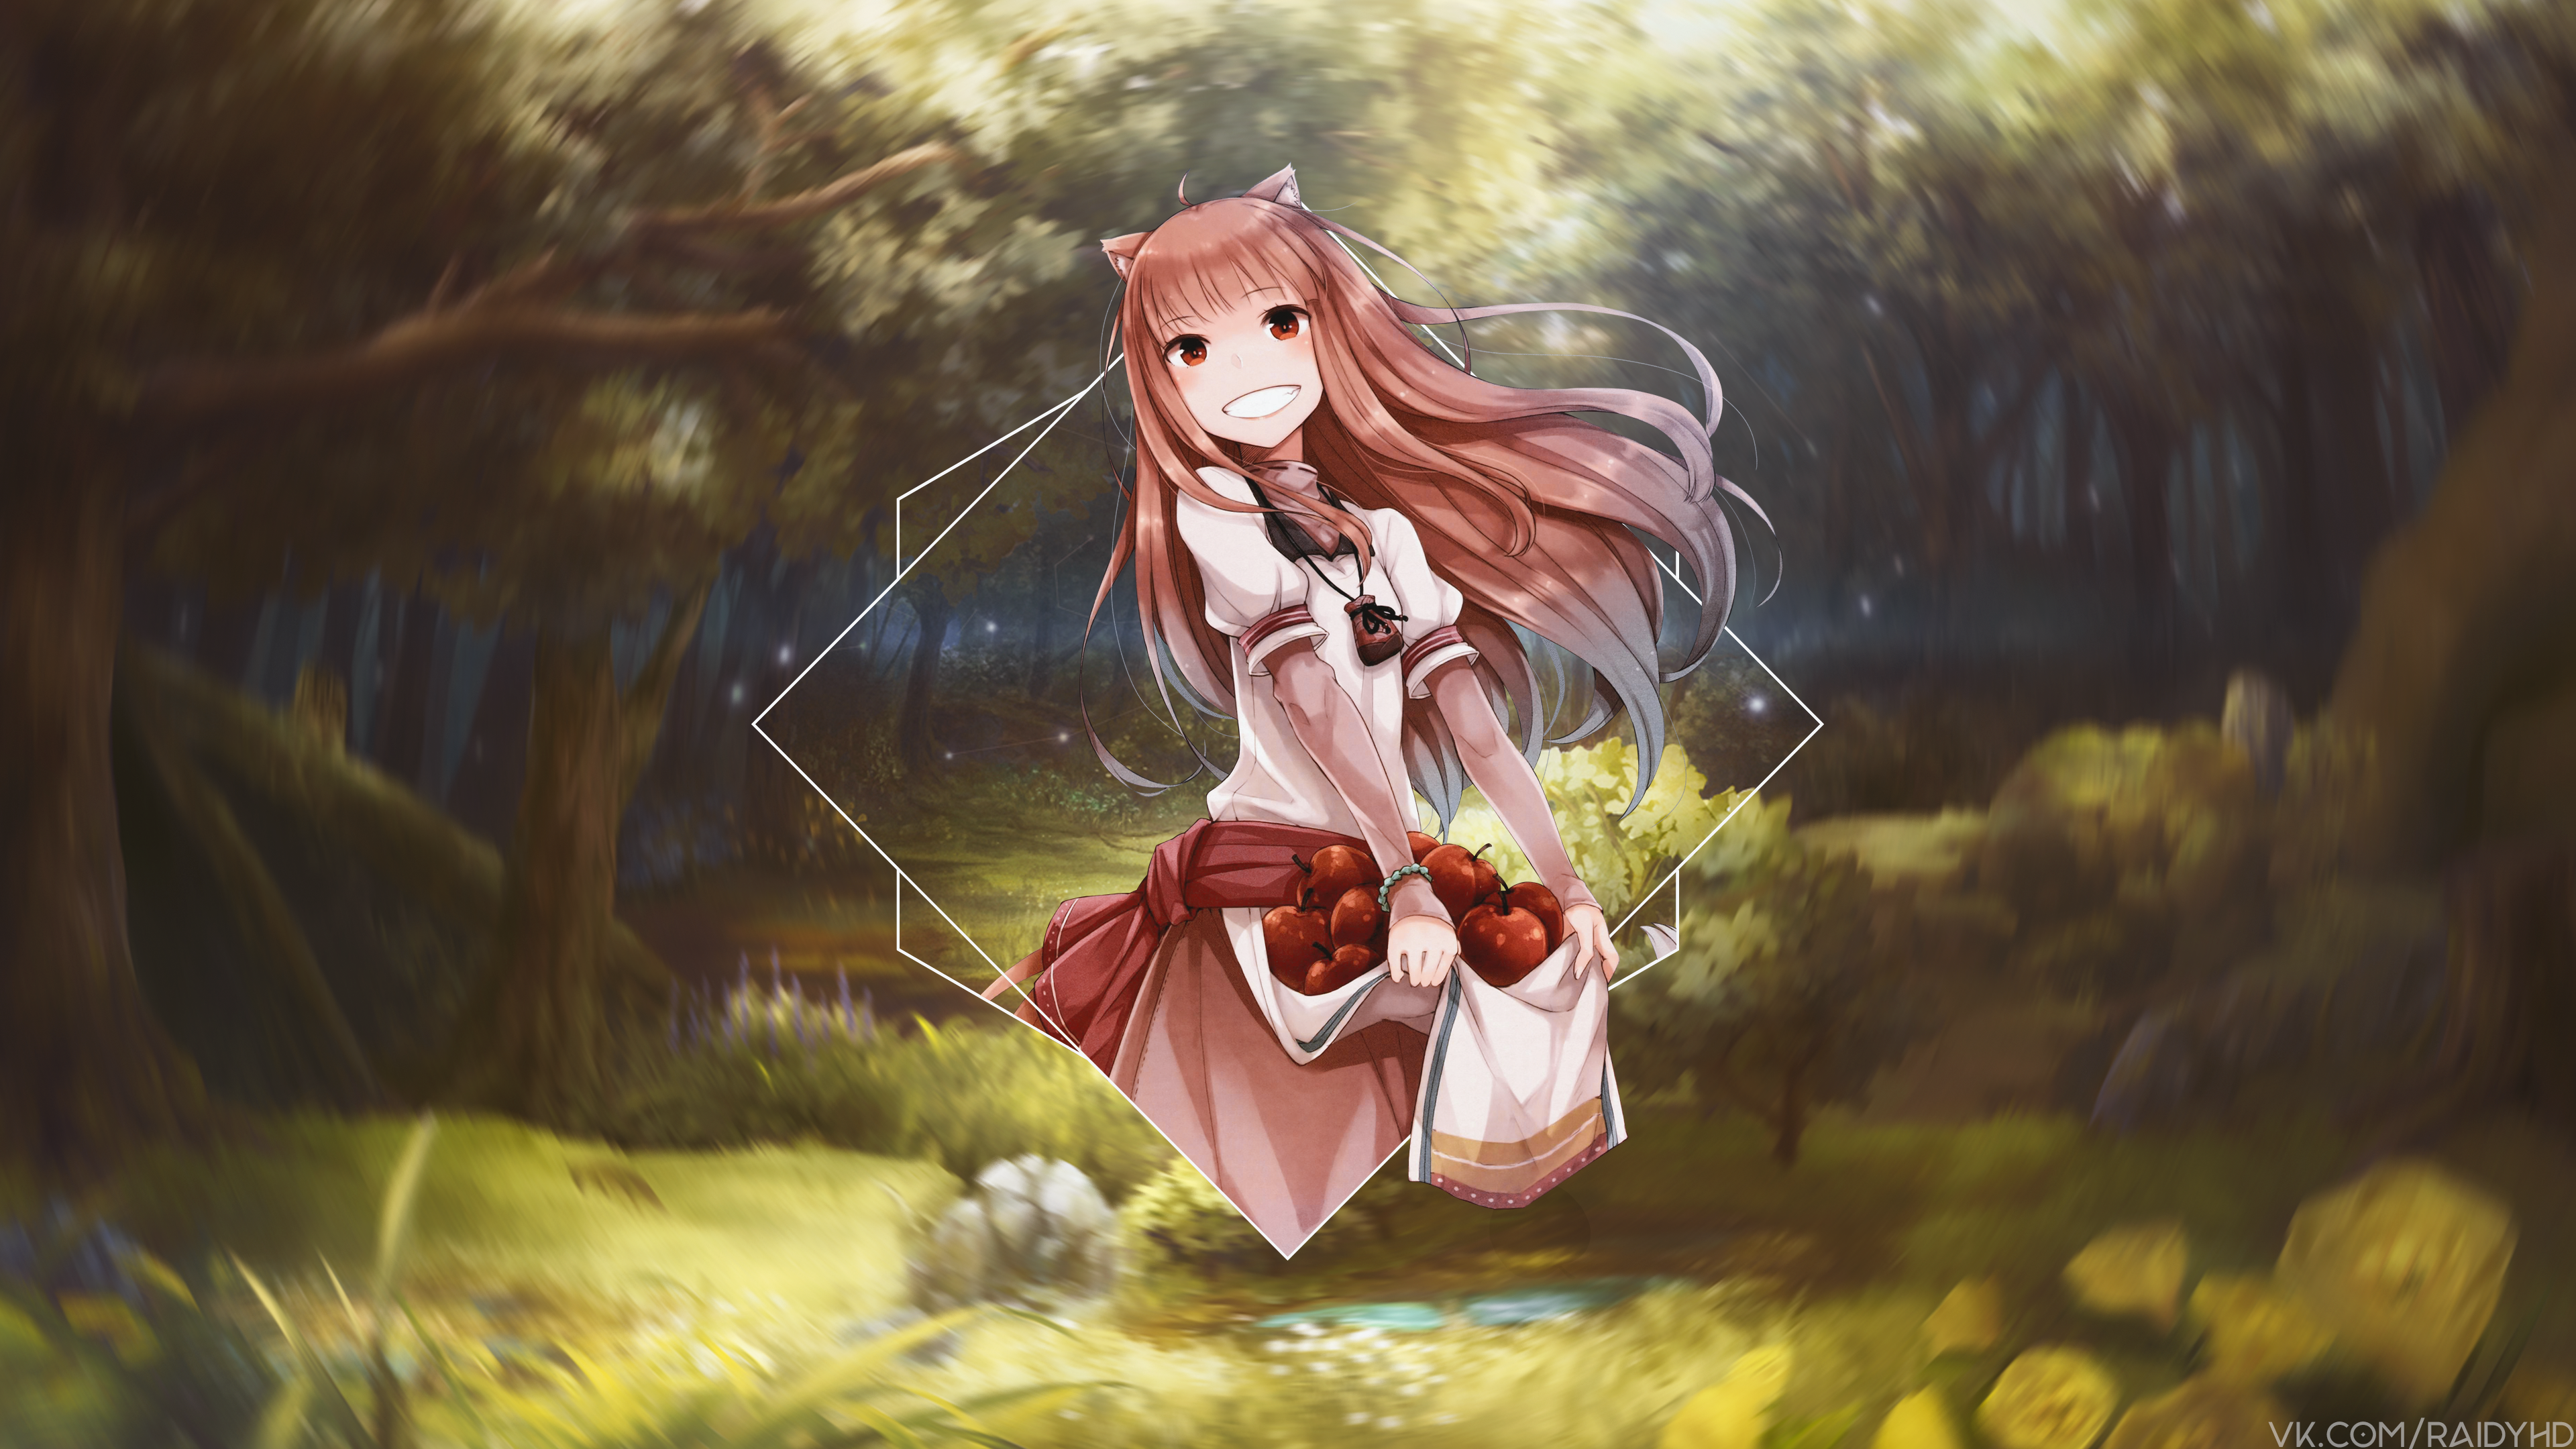 Anime 3840x2160 anime girls anime picture-in-picture Spice and Wolf Holo (Spice and Wolf)